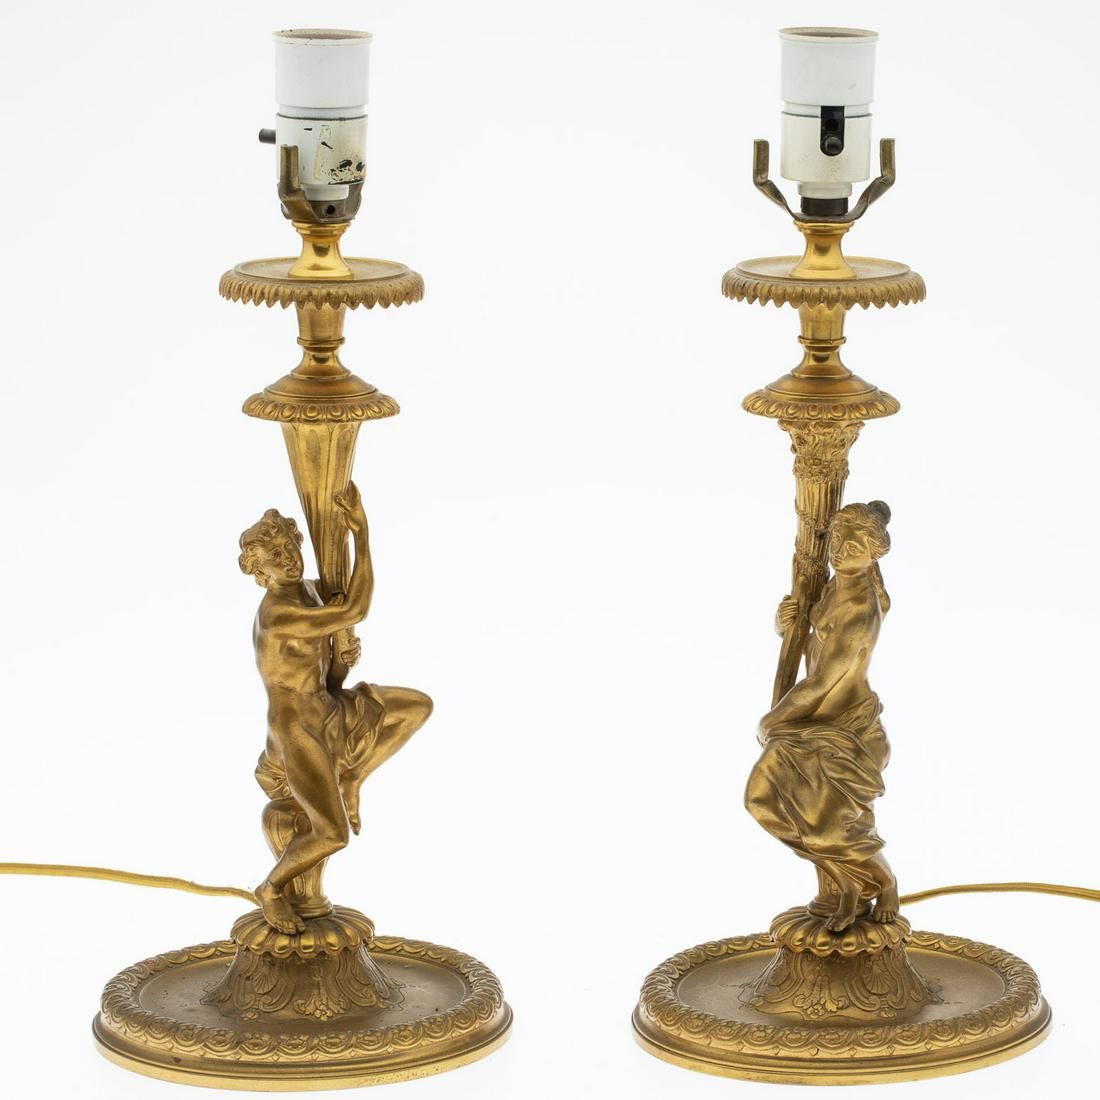 PAIR OF FRENCH GILT METAL CANDLESTICKS 3d3276